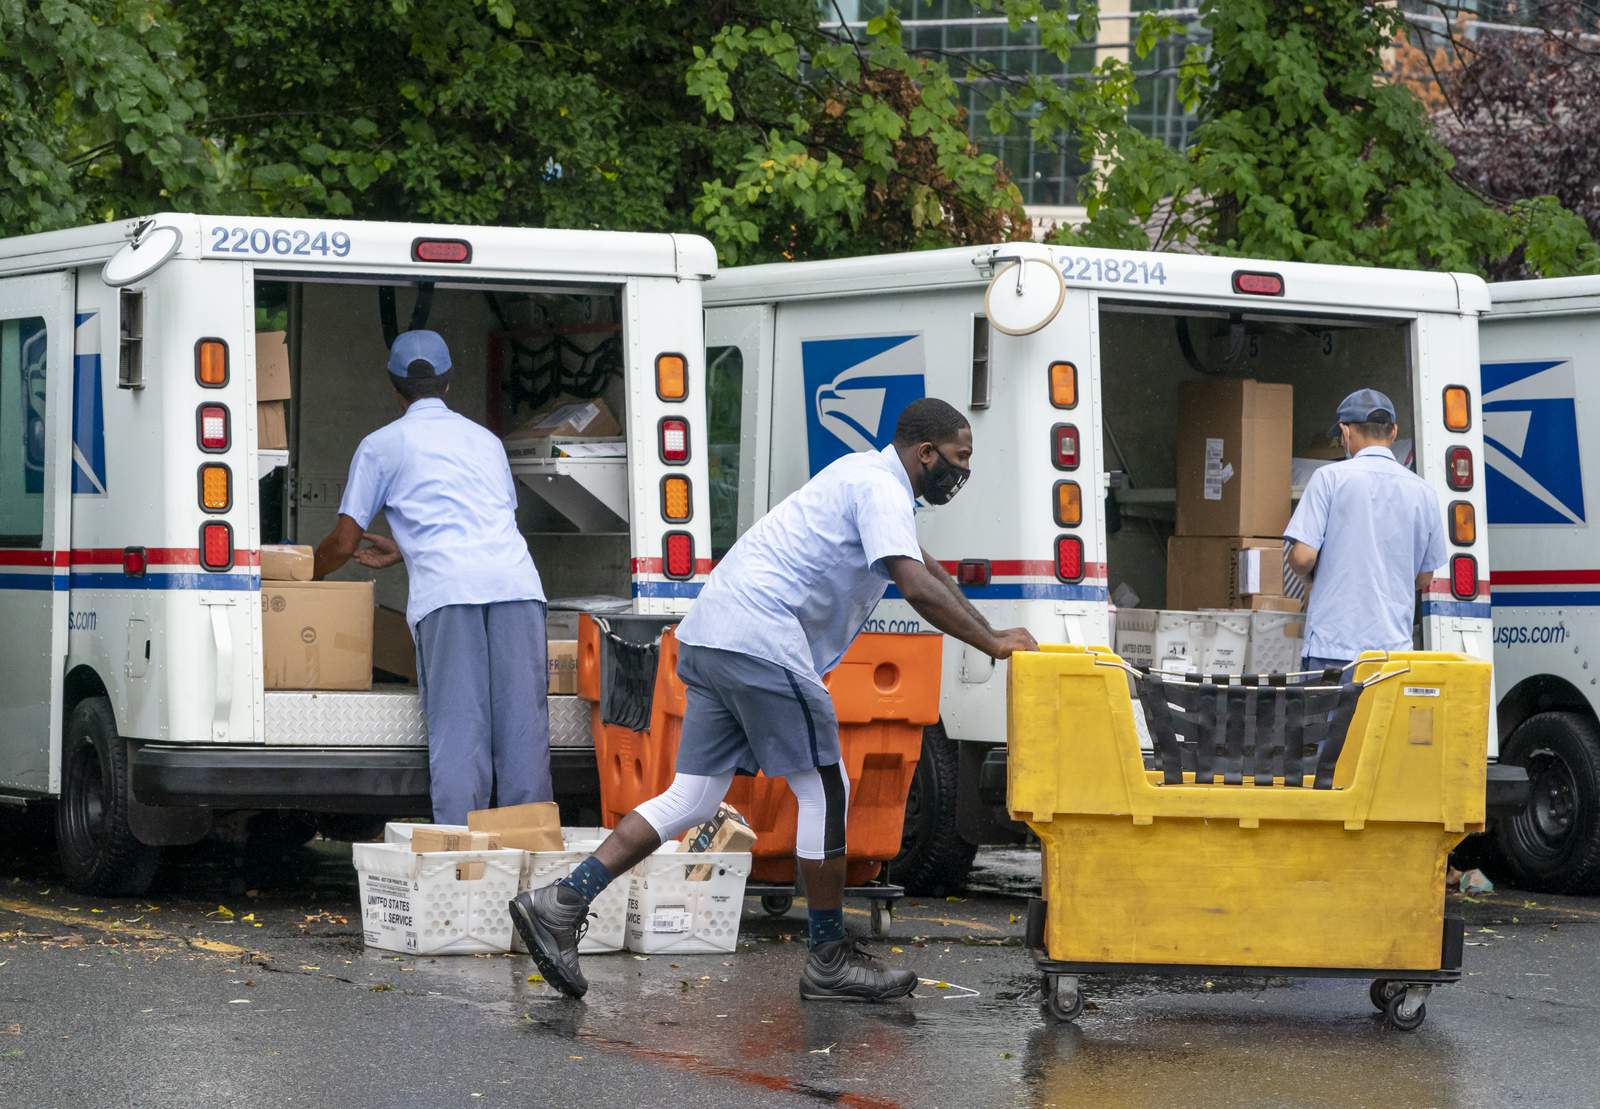 Postal Service emerges as flash point heading into election